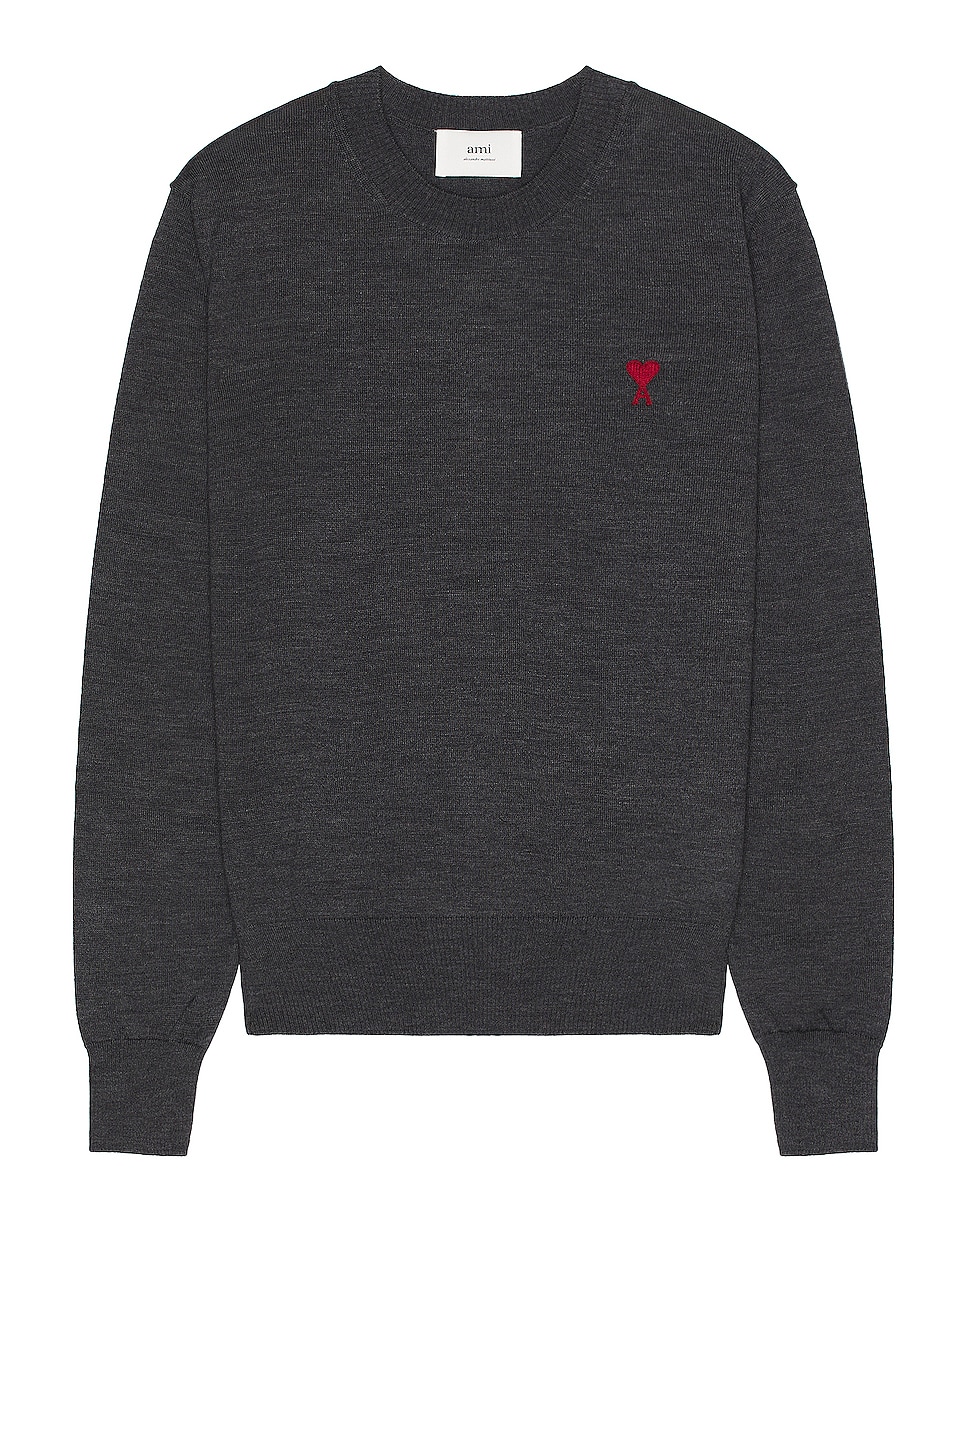 Image 1 of ami ADC Crewneck Sweater in Heather Grey